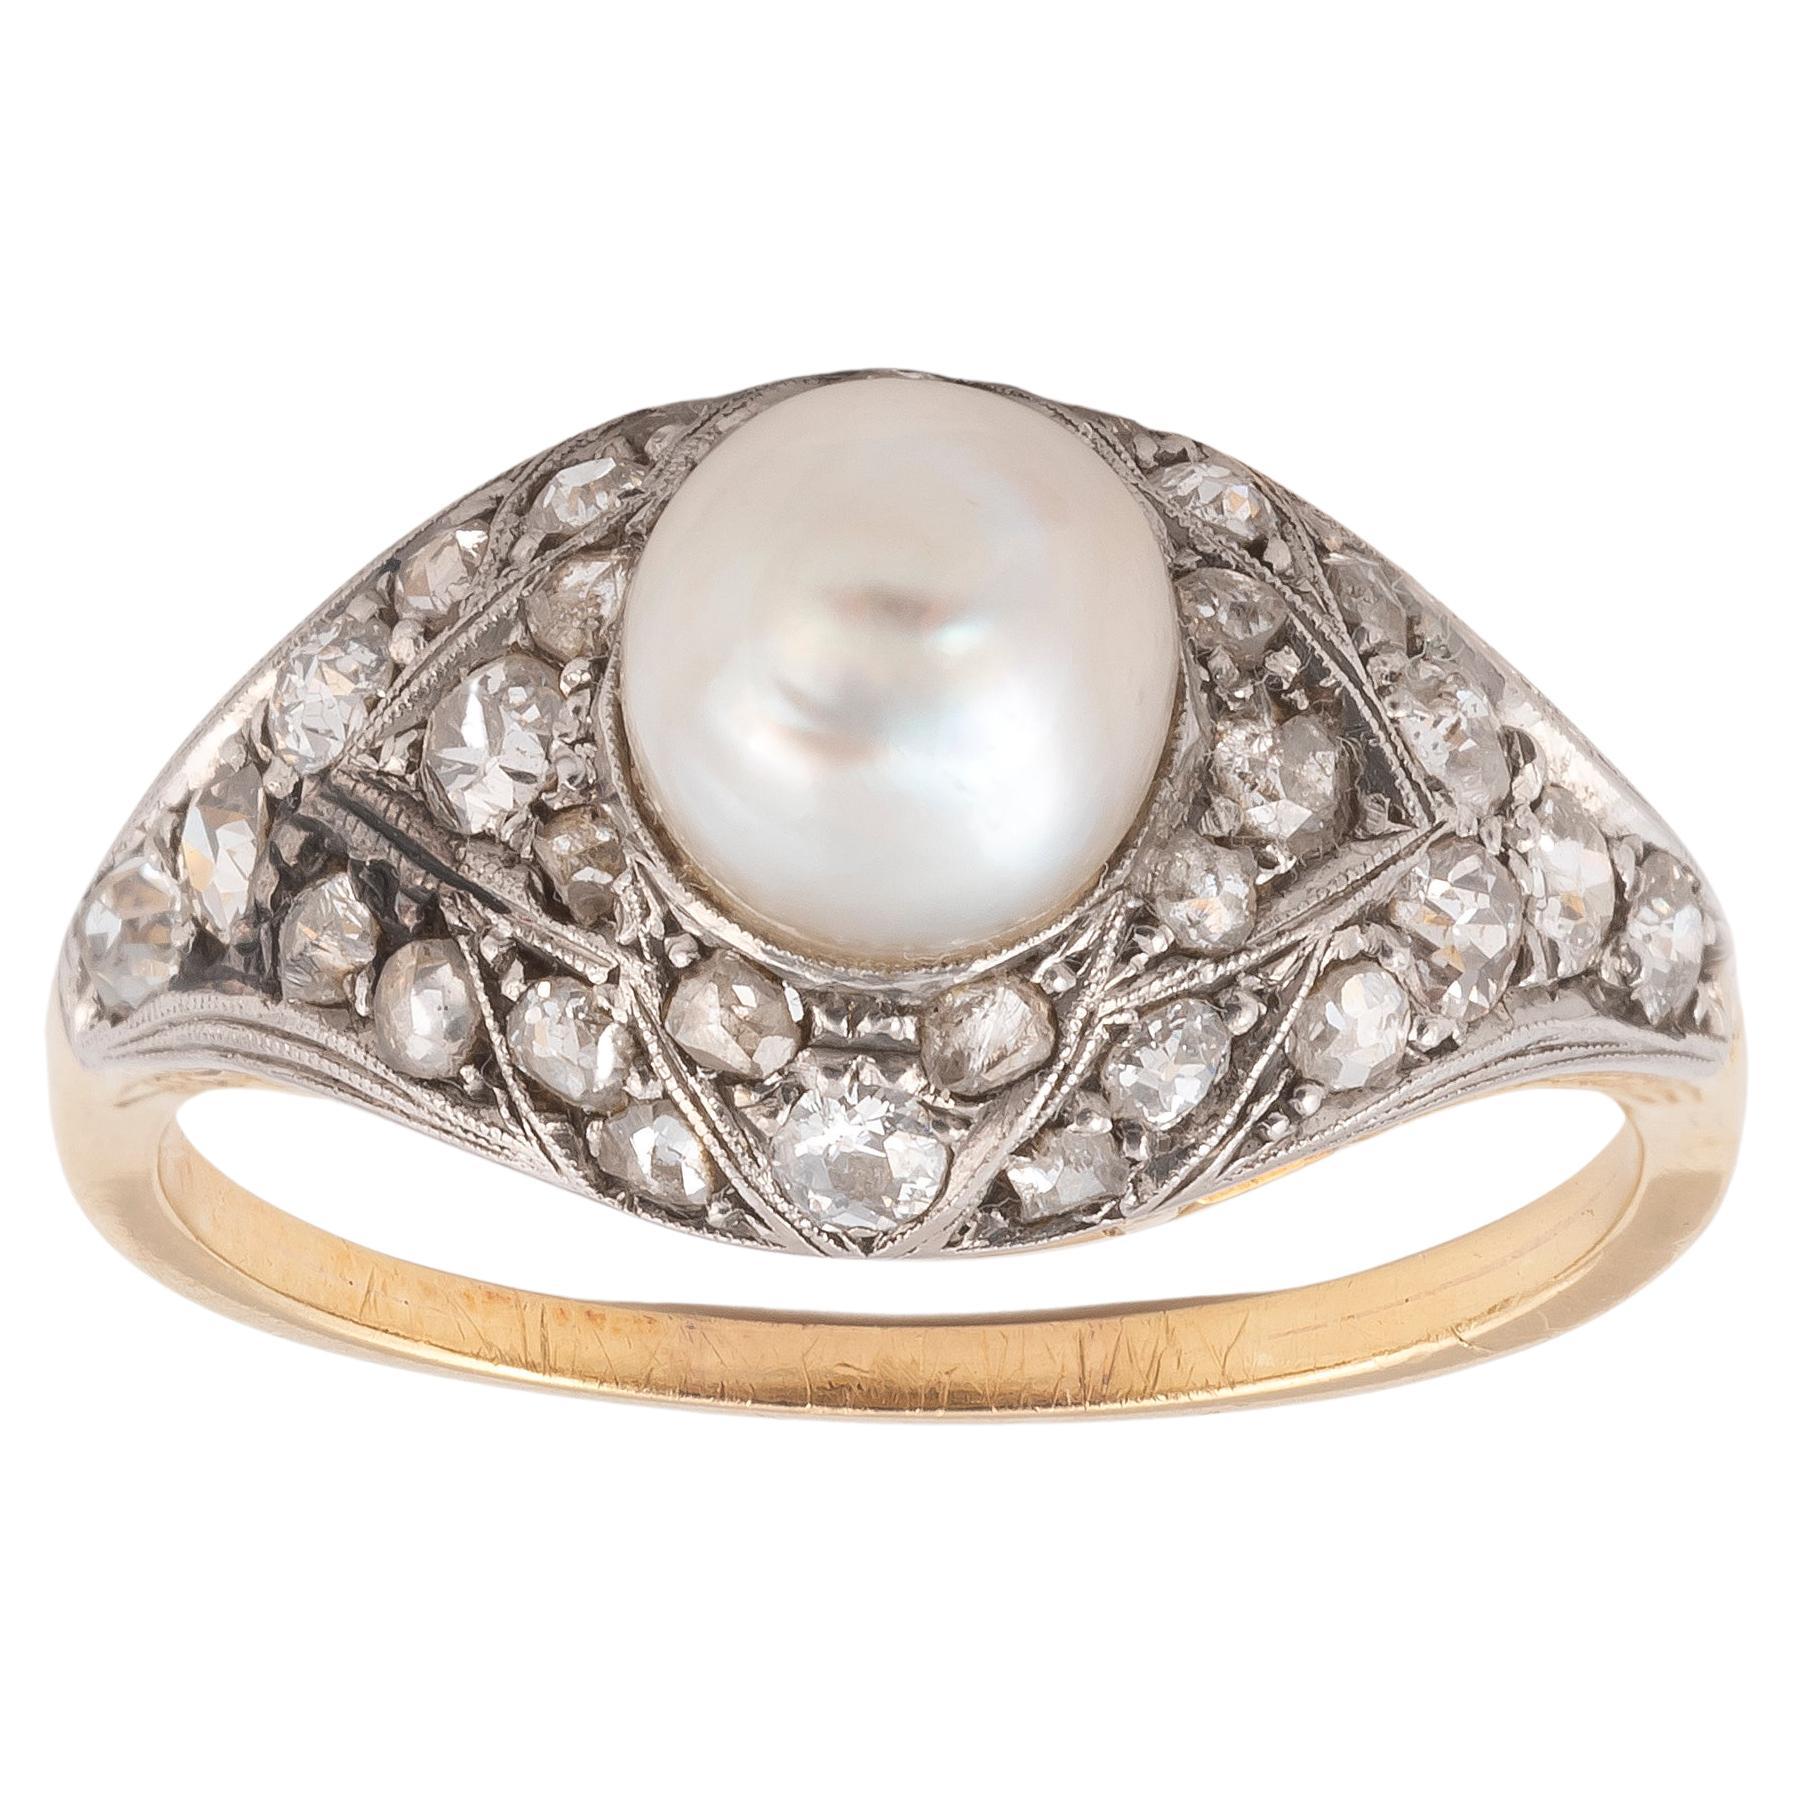 

Of bombé design, centred with a single pearl within a pierced surround of old and single-cut diamonds, ring size 8 3/4
Weight:  4.45gr.
